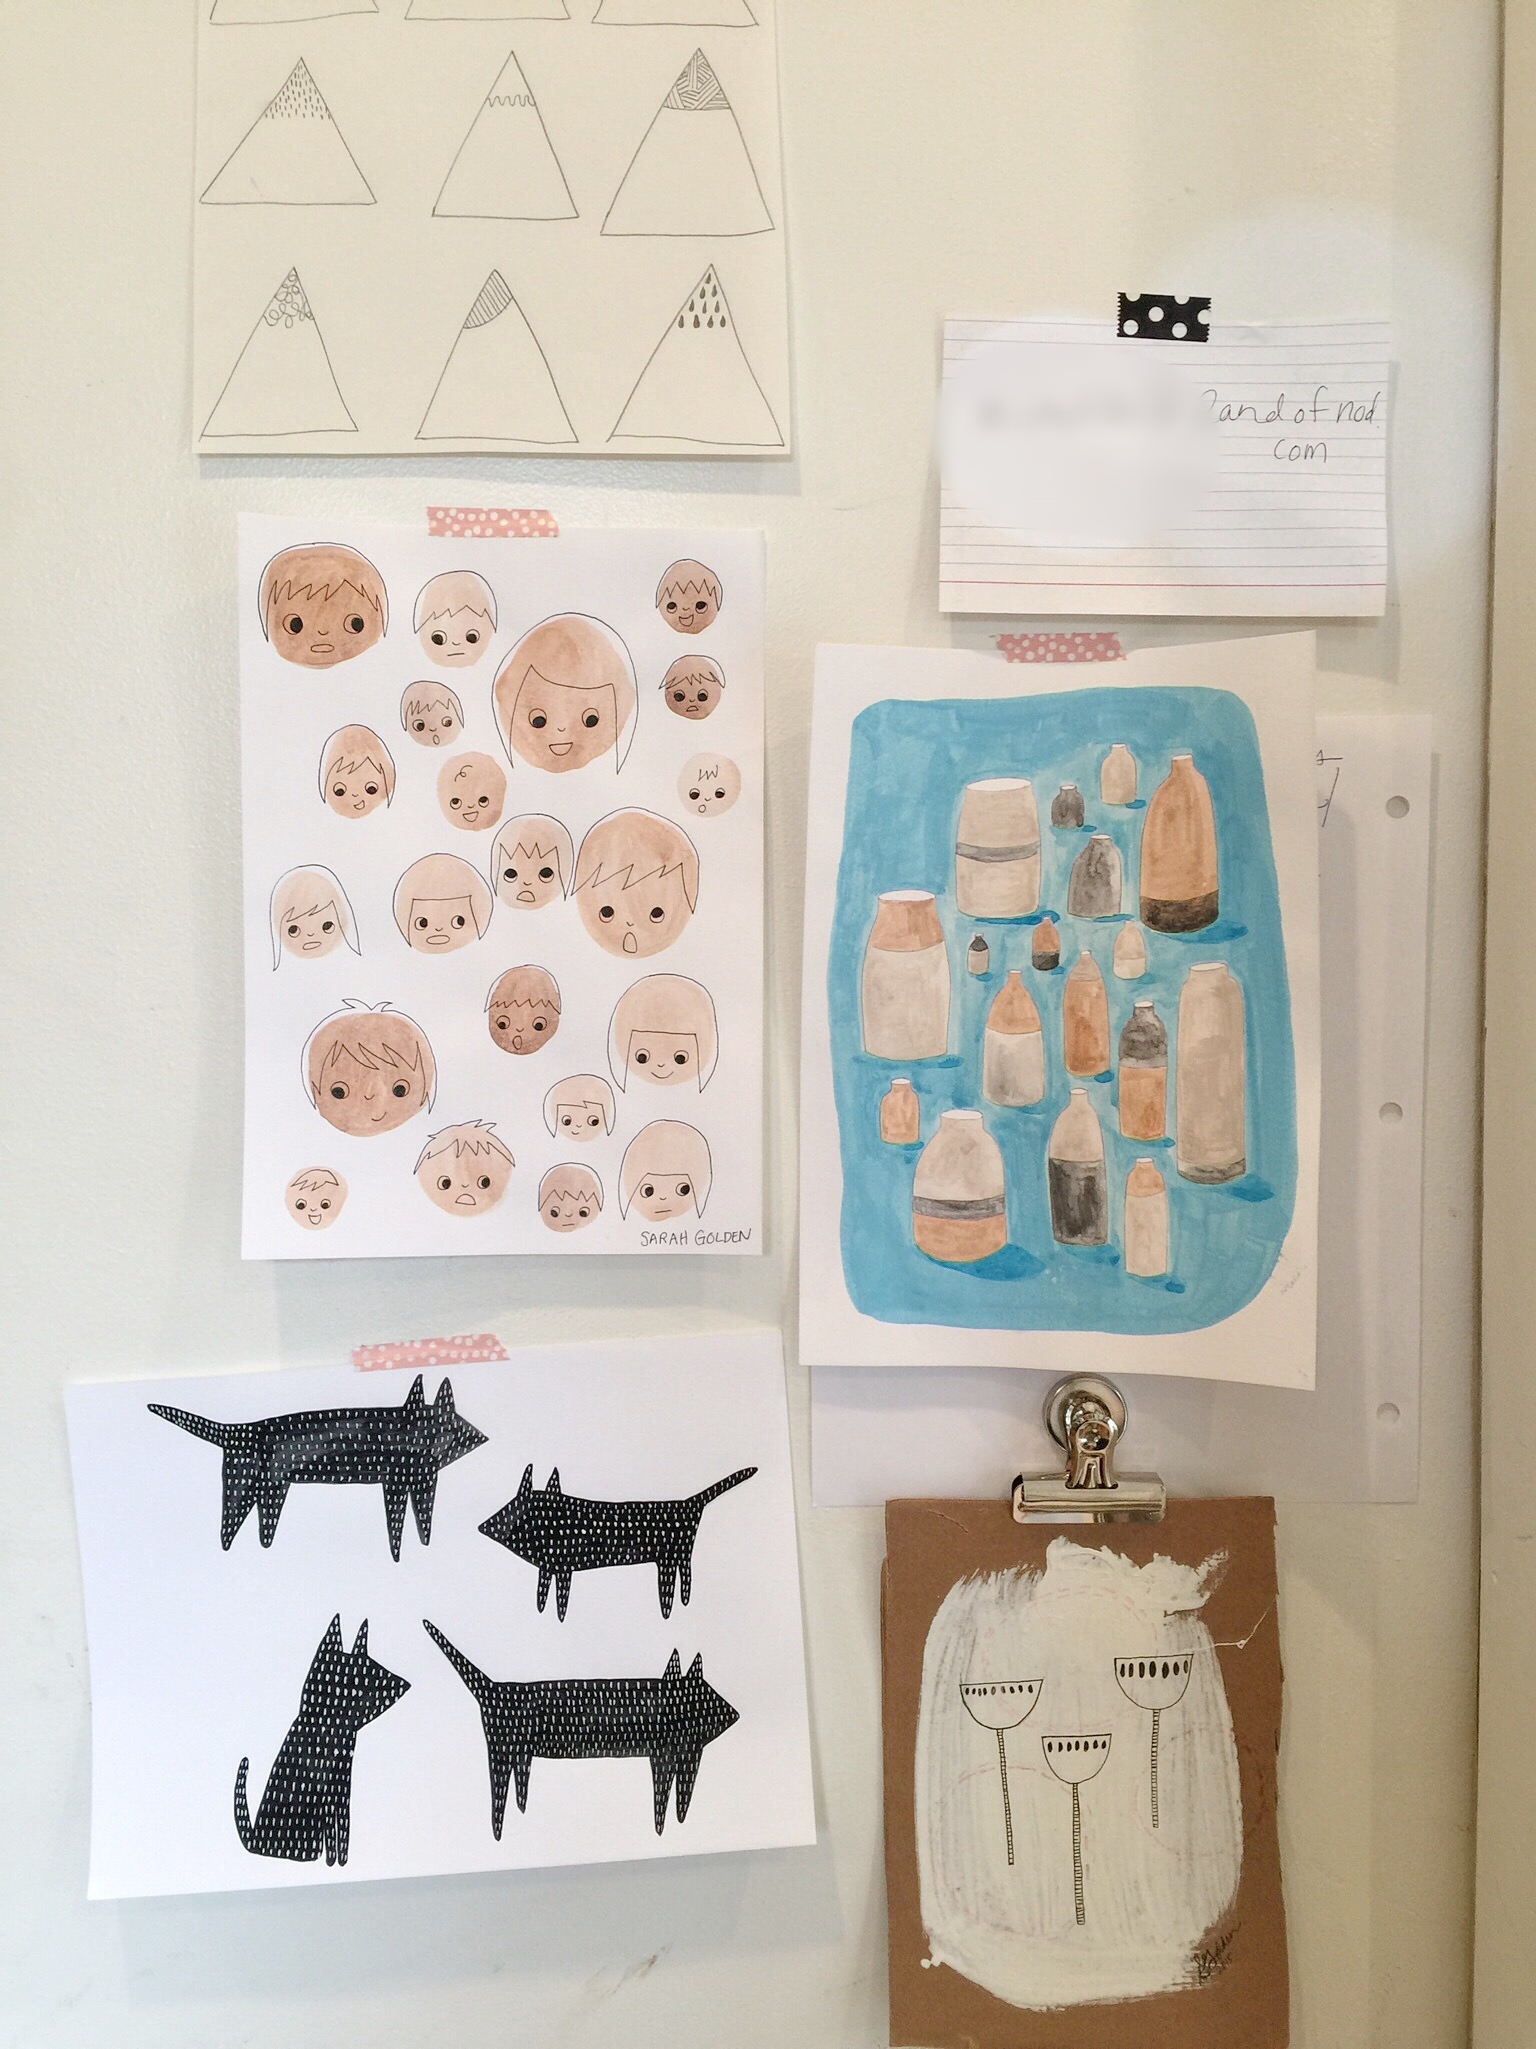  We're crazy about these family doodles! 